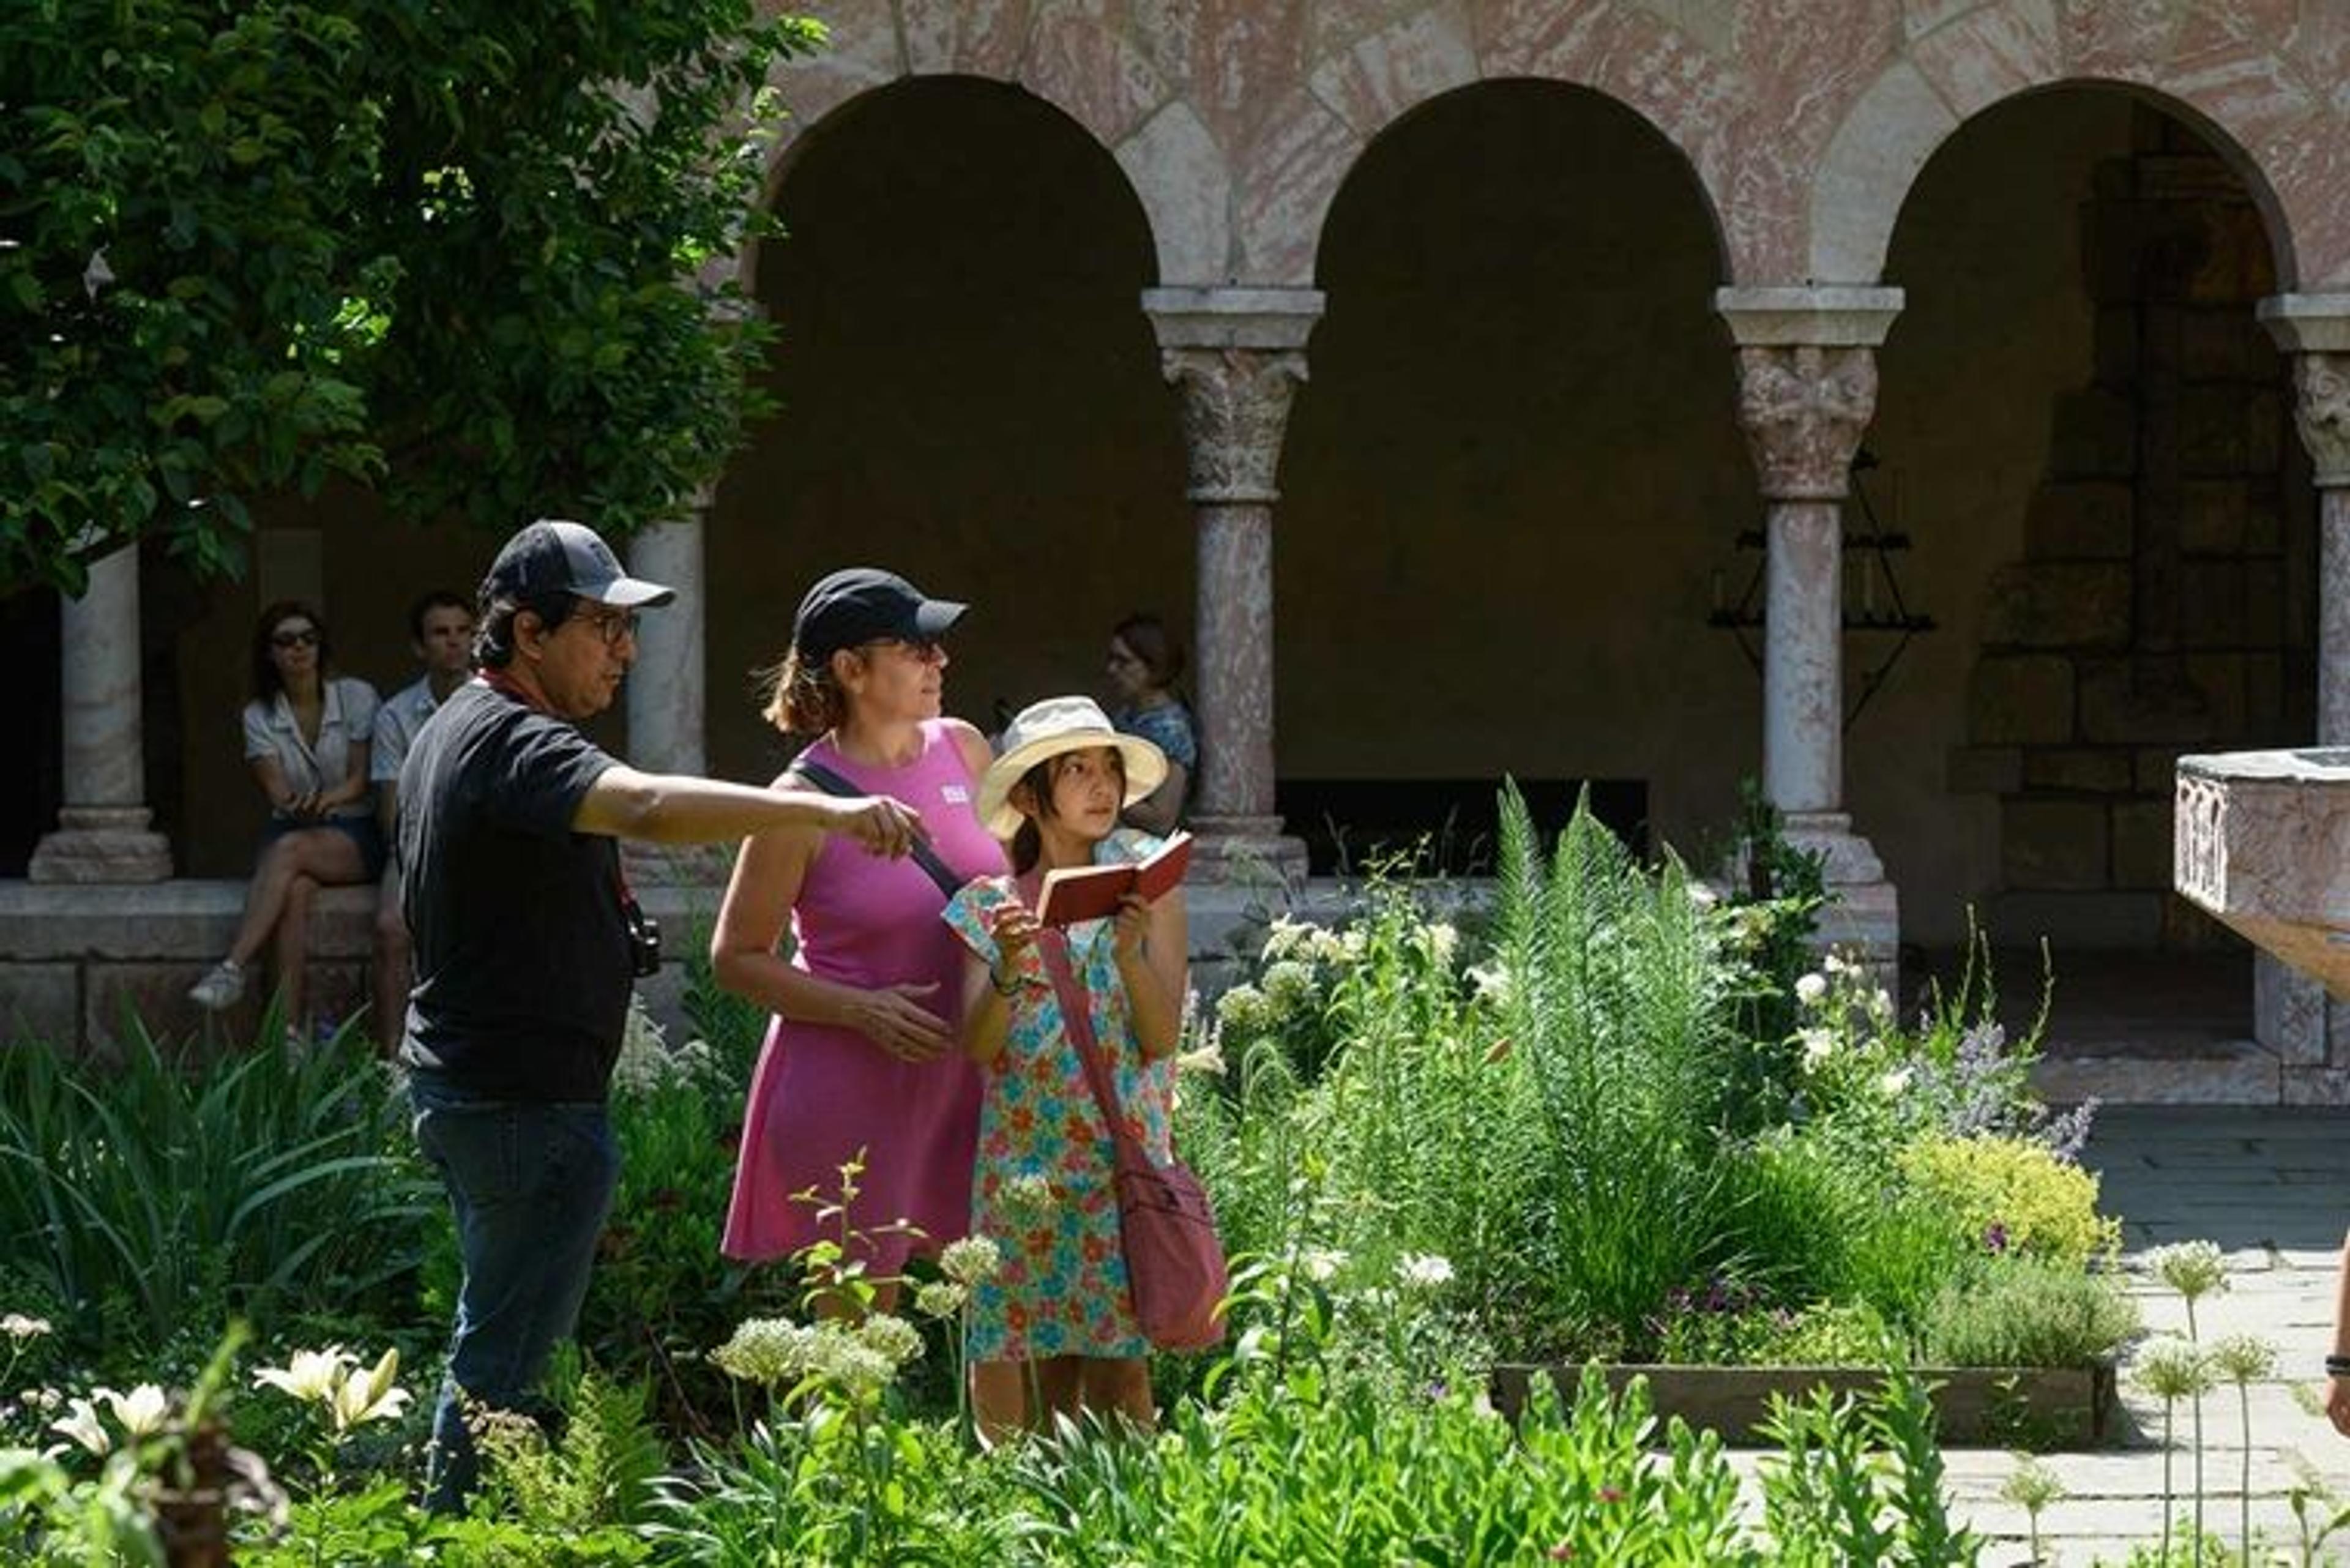 A daughter, father, and mother enjoying a sunny day among garden beds in a medieval cloister.